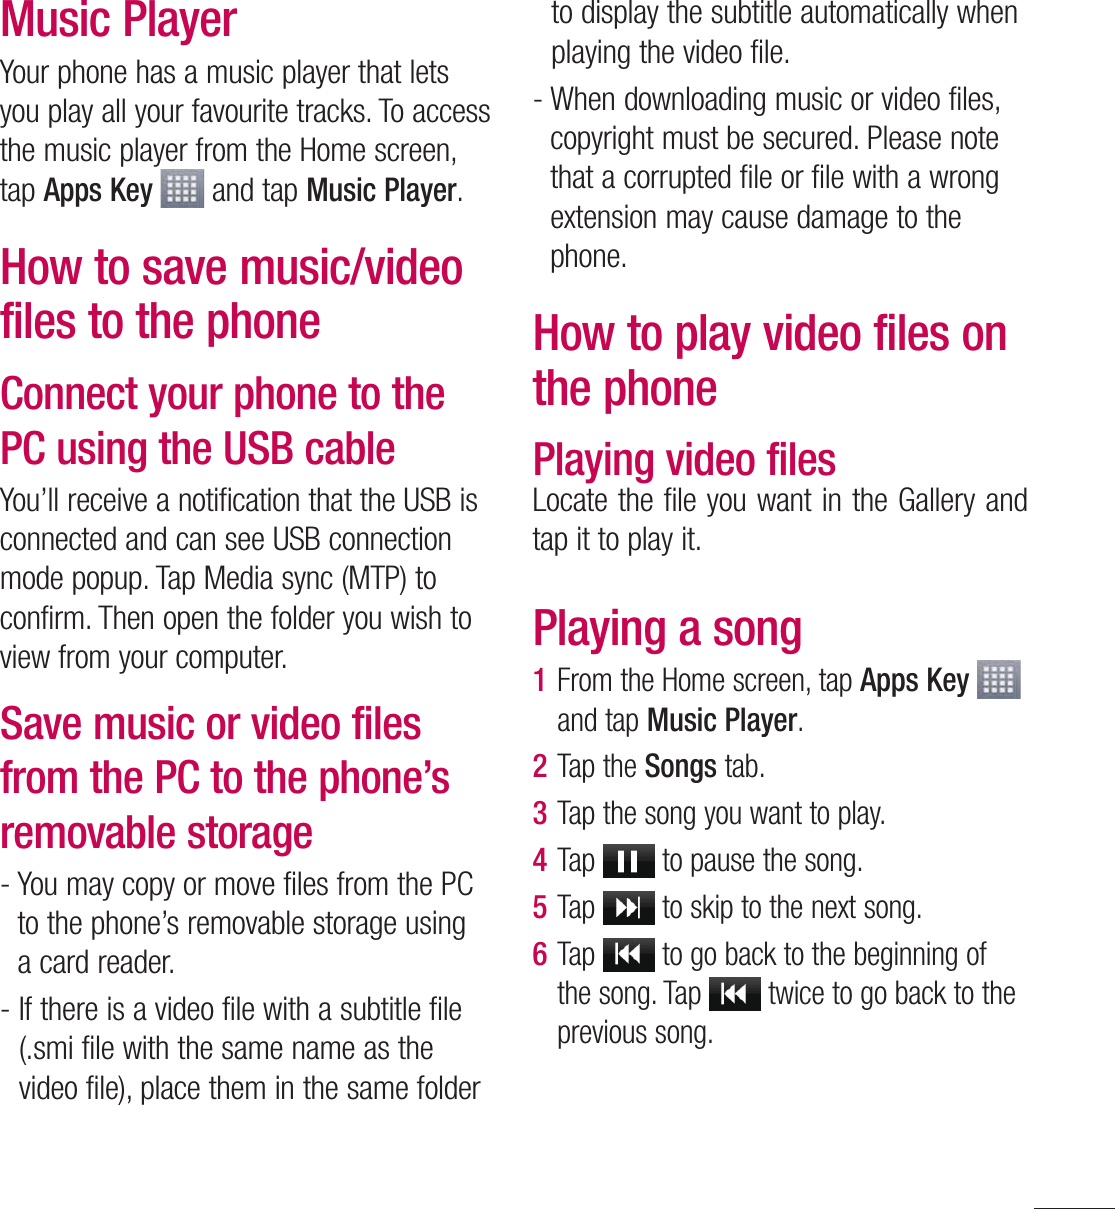 77Music PlayerYour phone has a music player that lets you play all your favourite tracks. To access the music player from the Home screen, tap Apps Key  and tap Music Player.How to save music/video files to the phoneConnect your phone to the PC using the USB cableYou’ll receive a notification that the USB is connected and can see USB connection mode popup. Tap Media sync (MTP) to confirm. Then open the folder you wish to view from your computer.Save music or video files from the PC to the phone’s removable storage-  You may copy or move files from the PC to the phone’s removable storage using a card reader.-  If there is a video file with a subtitle file (.smi file with the same name as the video file), place them in the same folder to display the subtitle automatically when playing the video file.-  When downloading music or video files, copyright must be secured. Please note that a corrupted file or file with a wrong extension may cause damage to the phone.How to play video files on the phonePlaying video filesLocate the file you want in the Gallery and tap it to play it.Playing a song1  From the Home screen, tap Apps Key   and tap Music Player.2  Tap the Songs tab.3  Tap the song you want to play.4  Tap   to pause the song.5  Tap   to skip to the next song.6  Tap   to go back to the beginning of the song. Tap   twice to go back to the previous song.